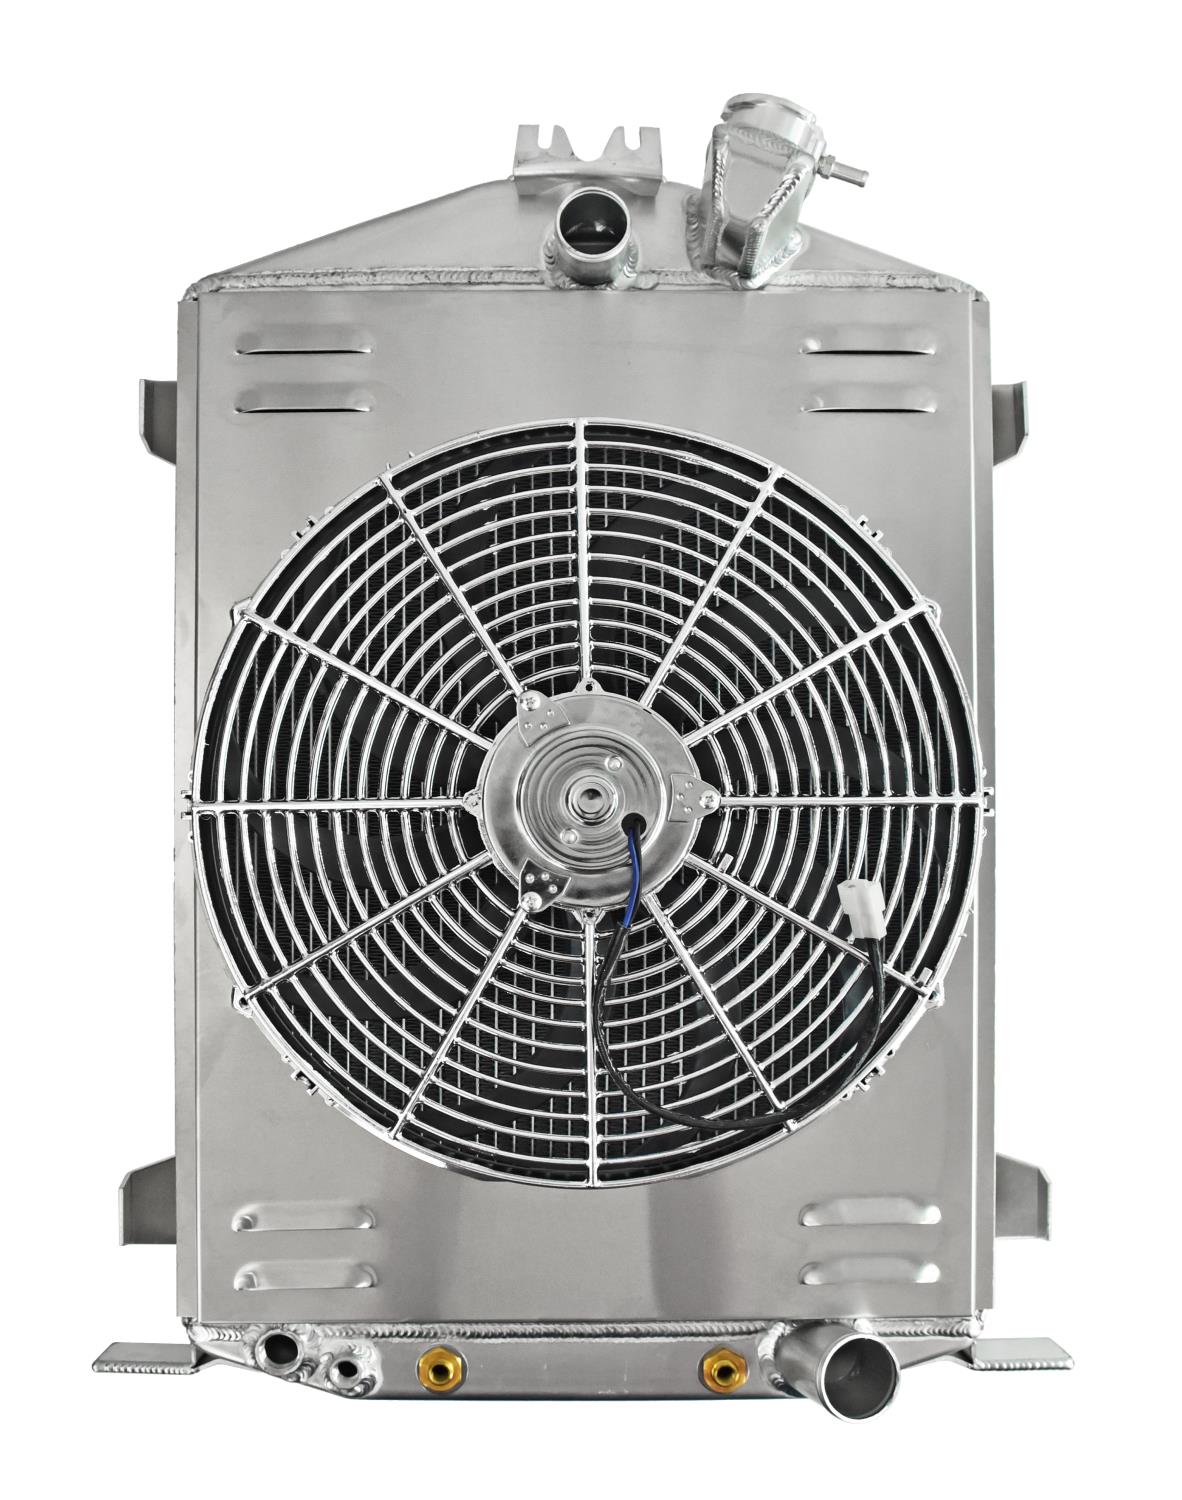 Aluminum Radiator & Fan Combo for 1932 Ford HI-BOY with Chevy V8 Engine & Full-Height Grill [16 in. FAN]